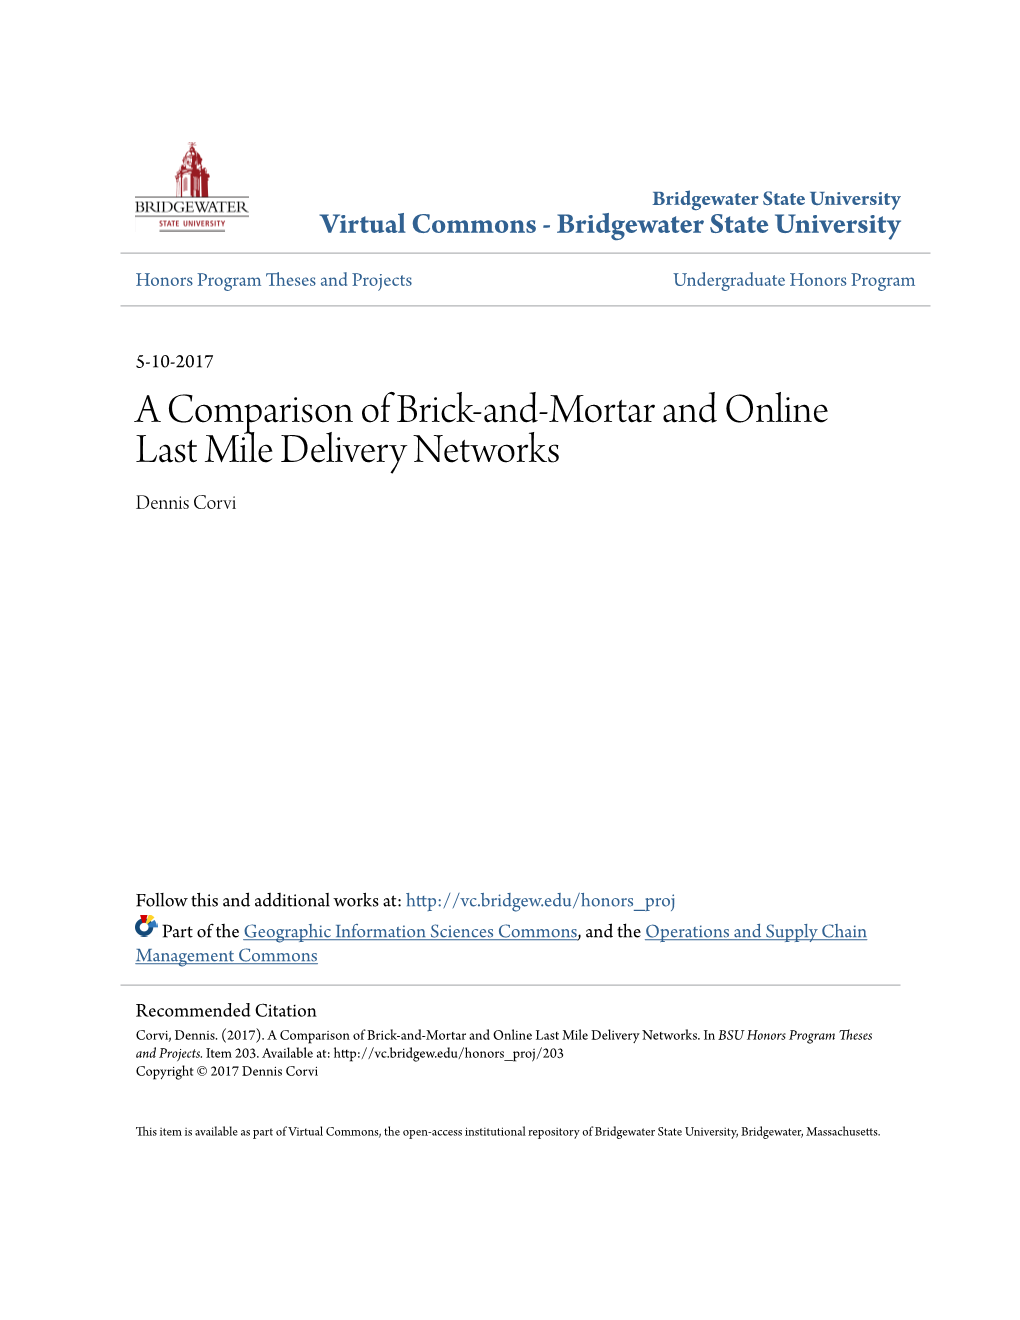 A Comparison of Brick-And-Mortar and Online Last Mile Delivery Networks Dennis Corvi